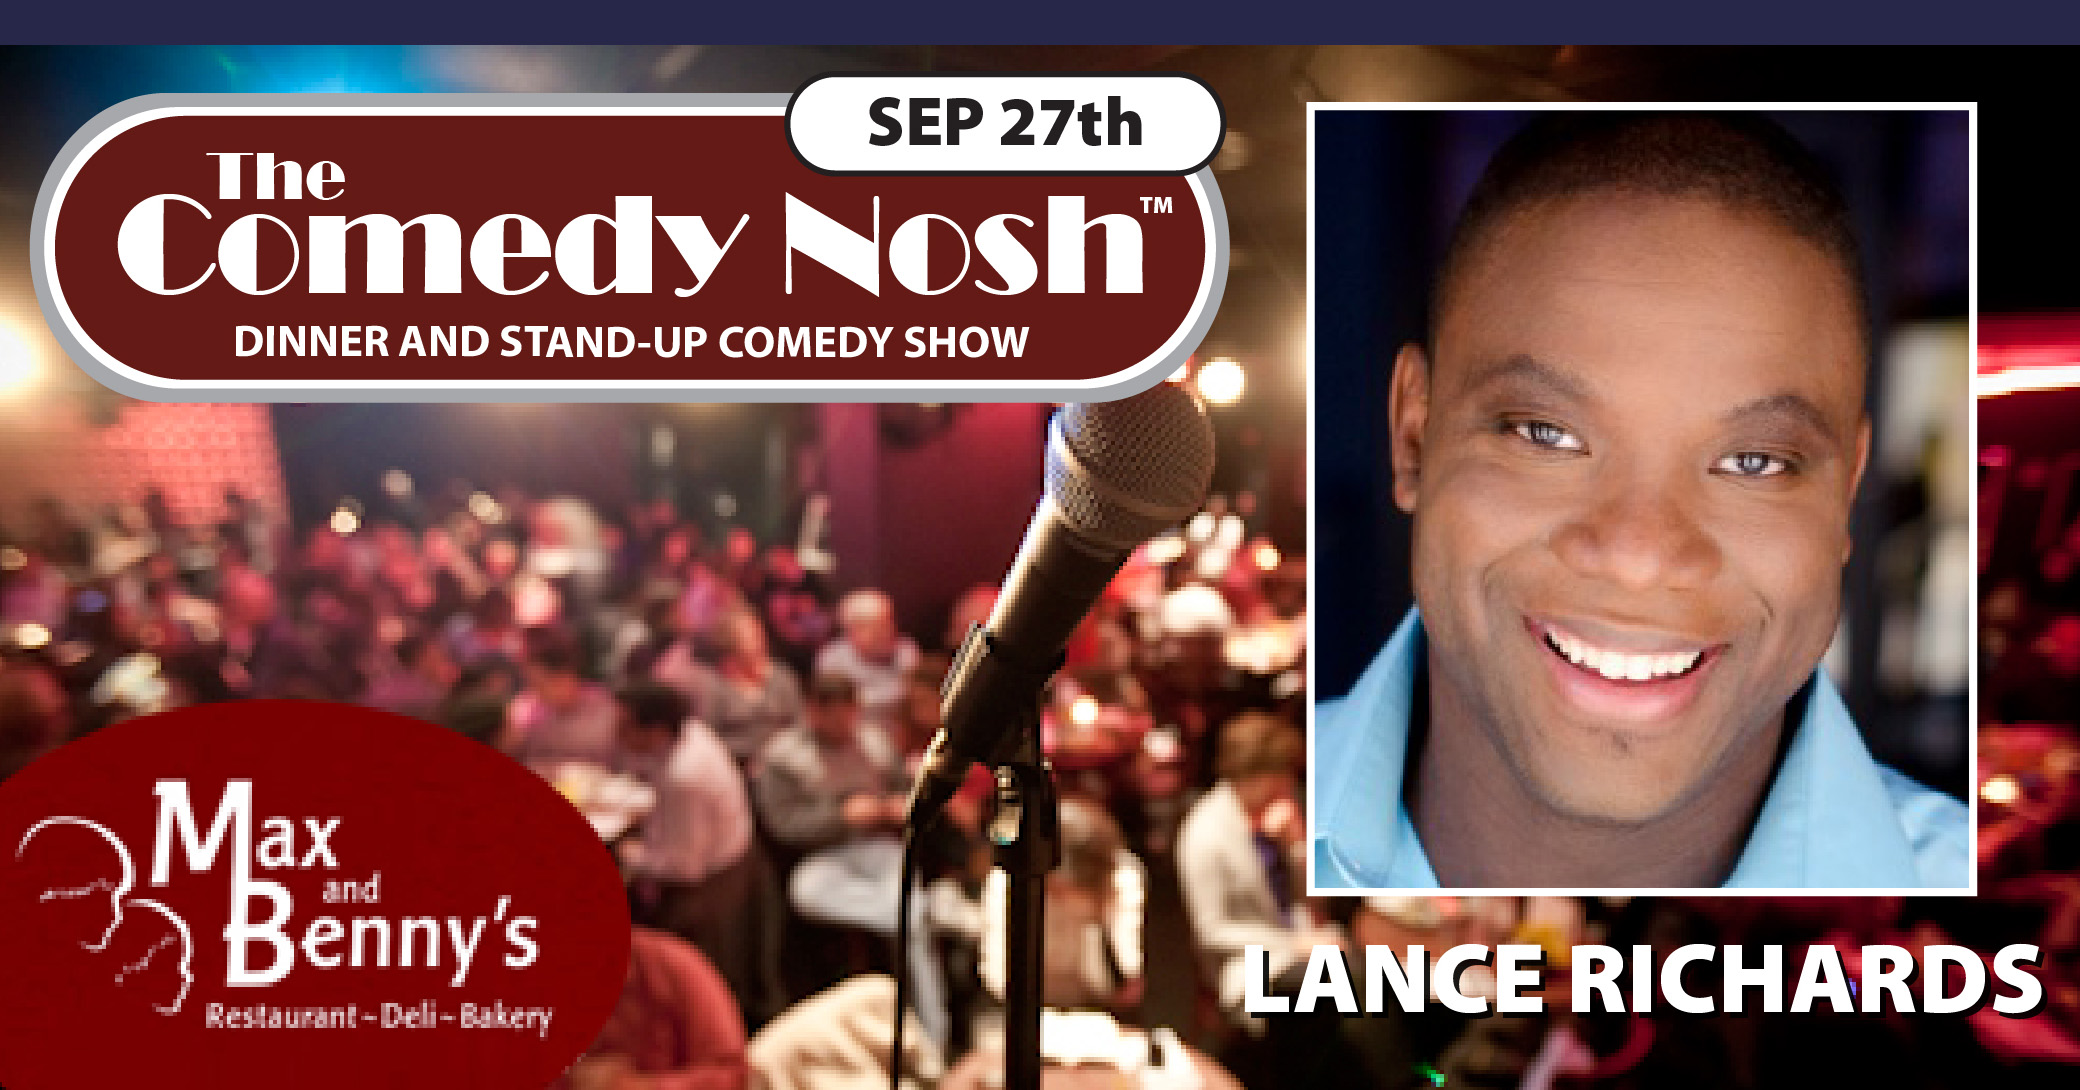 The Comedy Nosh with Headliner Lance Richards | Funnier By The Lake Comedy